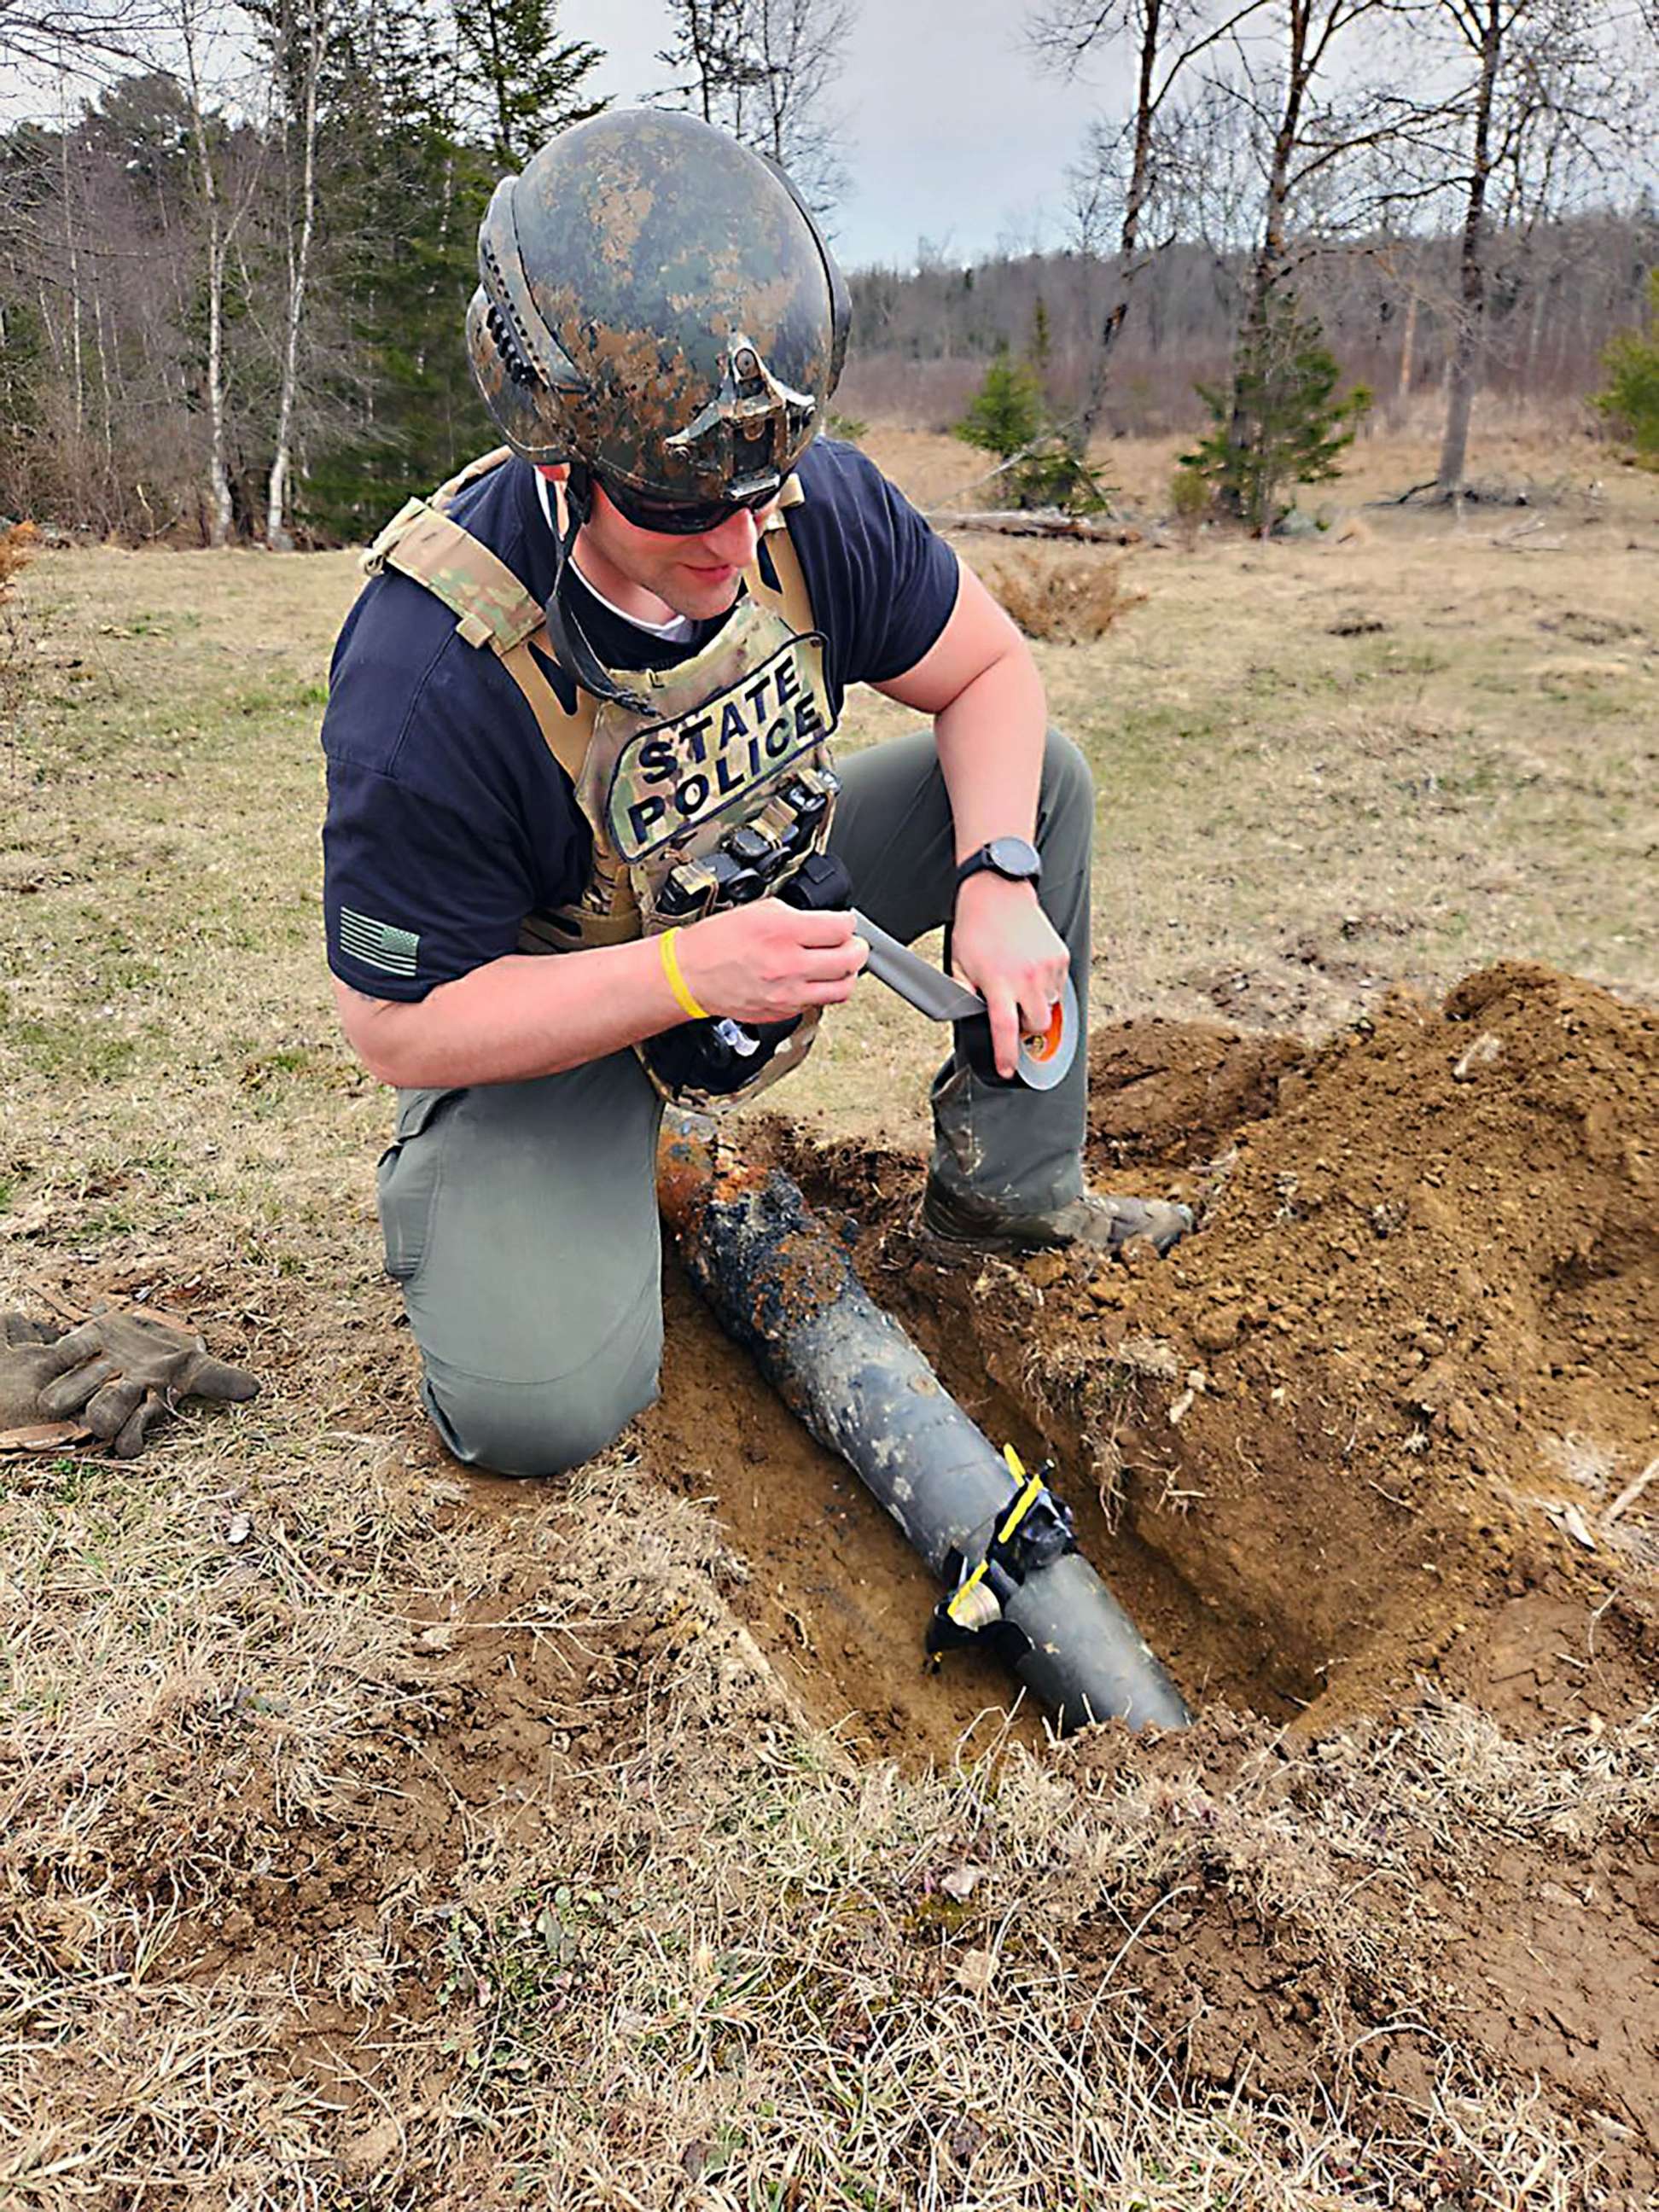 PHOTO: Maine lobsterman catches 5-foot military rocket